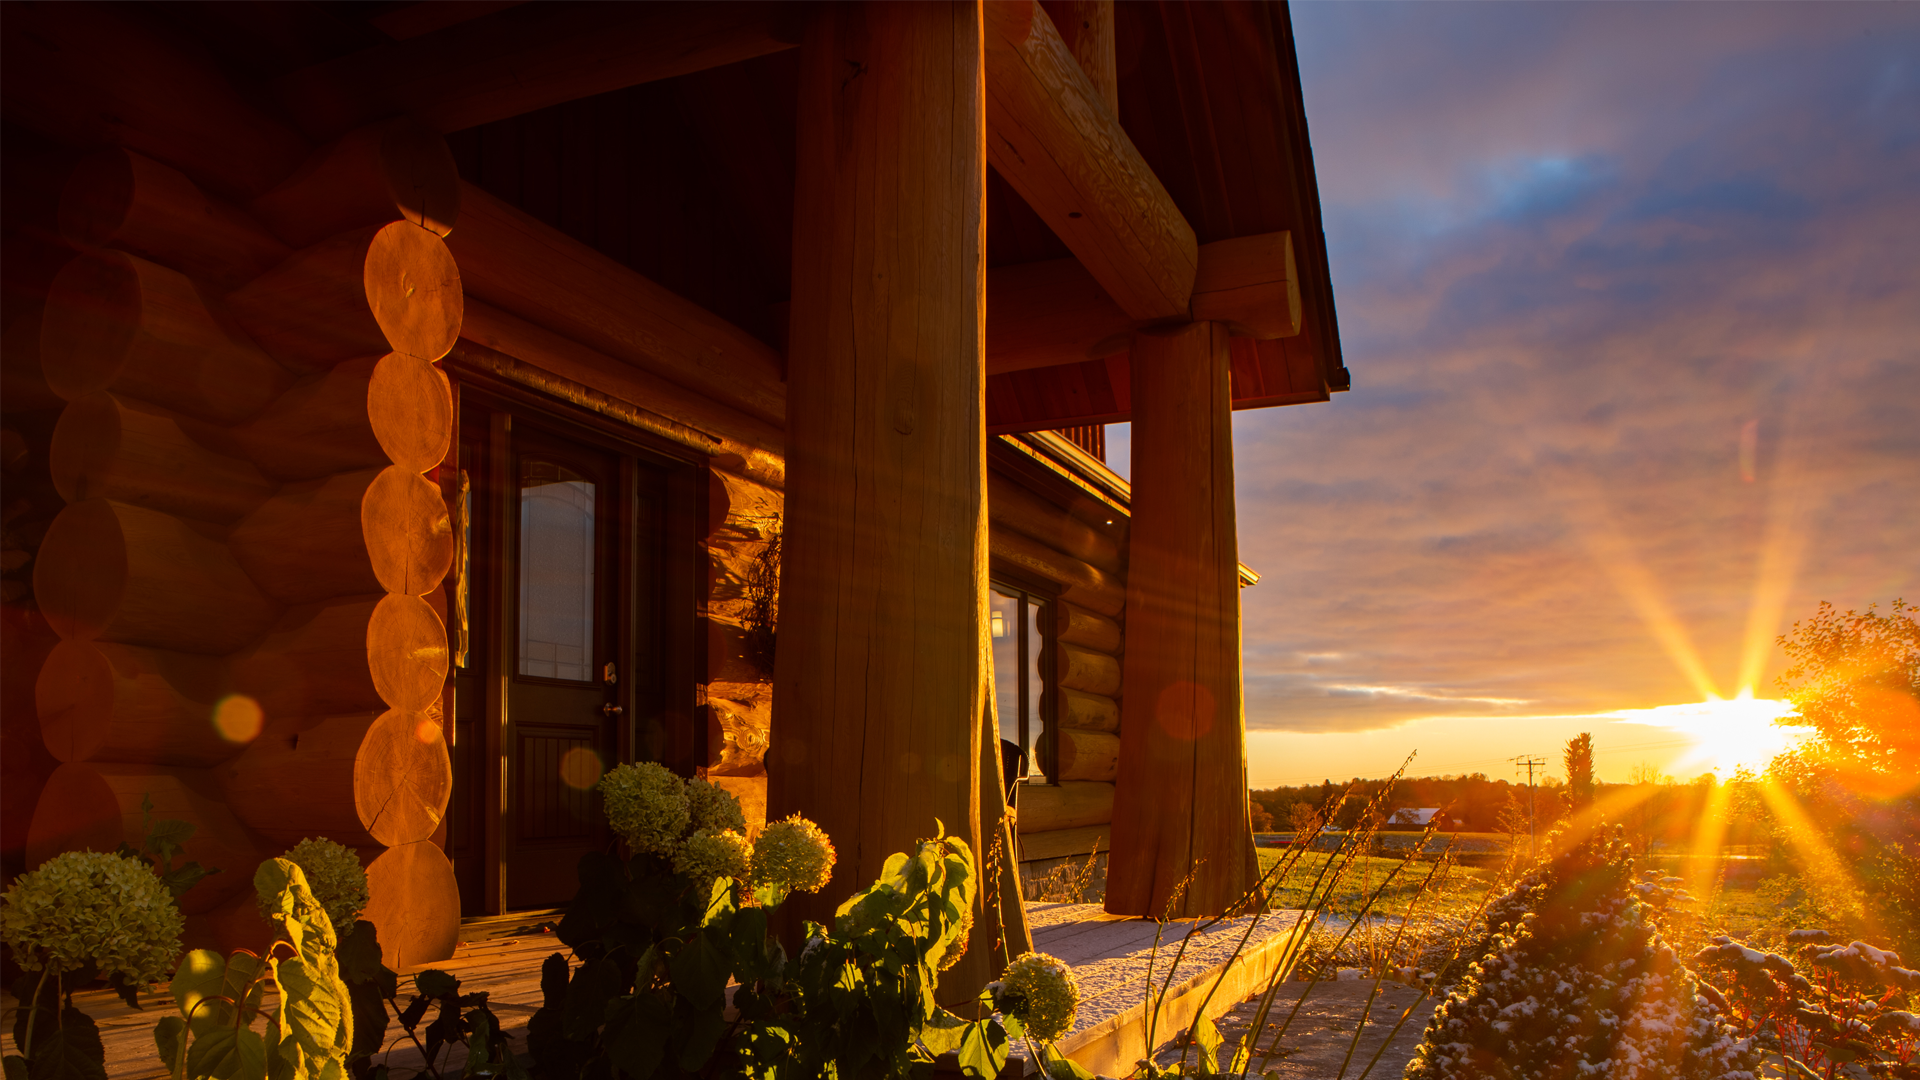 Sunset view of a log home with flared trunks at the entrance.